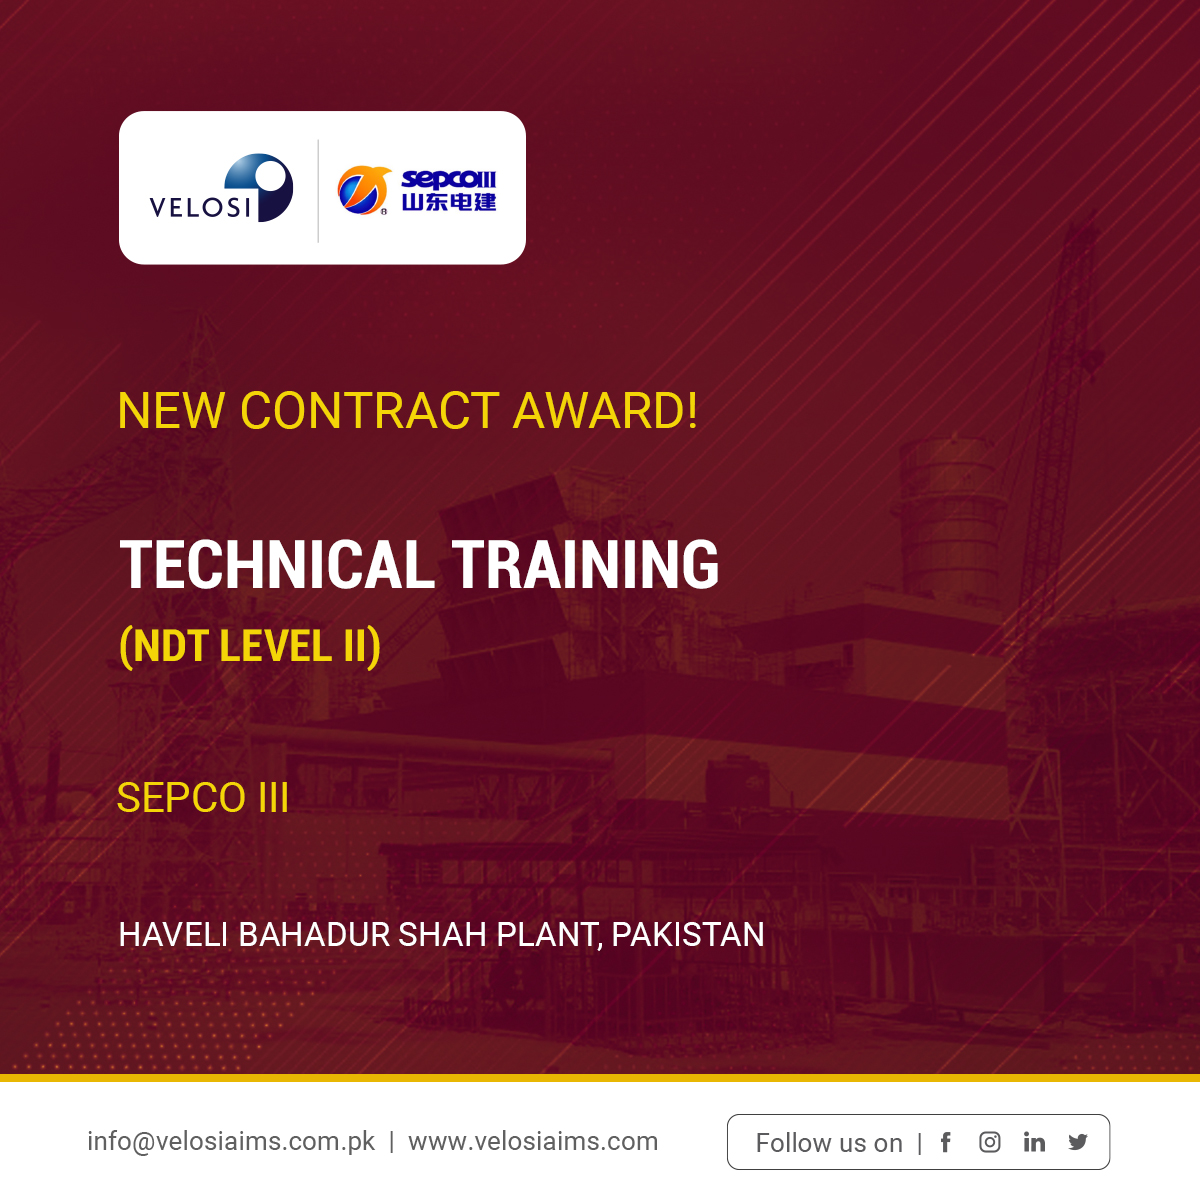 Velosi Integrity & Safety Pakistan has been awarded a contract by SEPCO III to conduct Technical Training (NDT Level II training)